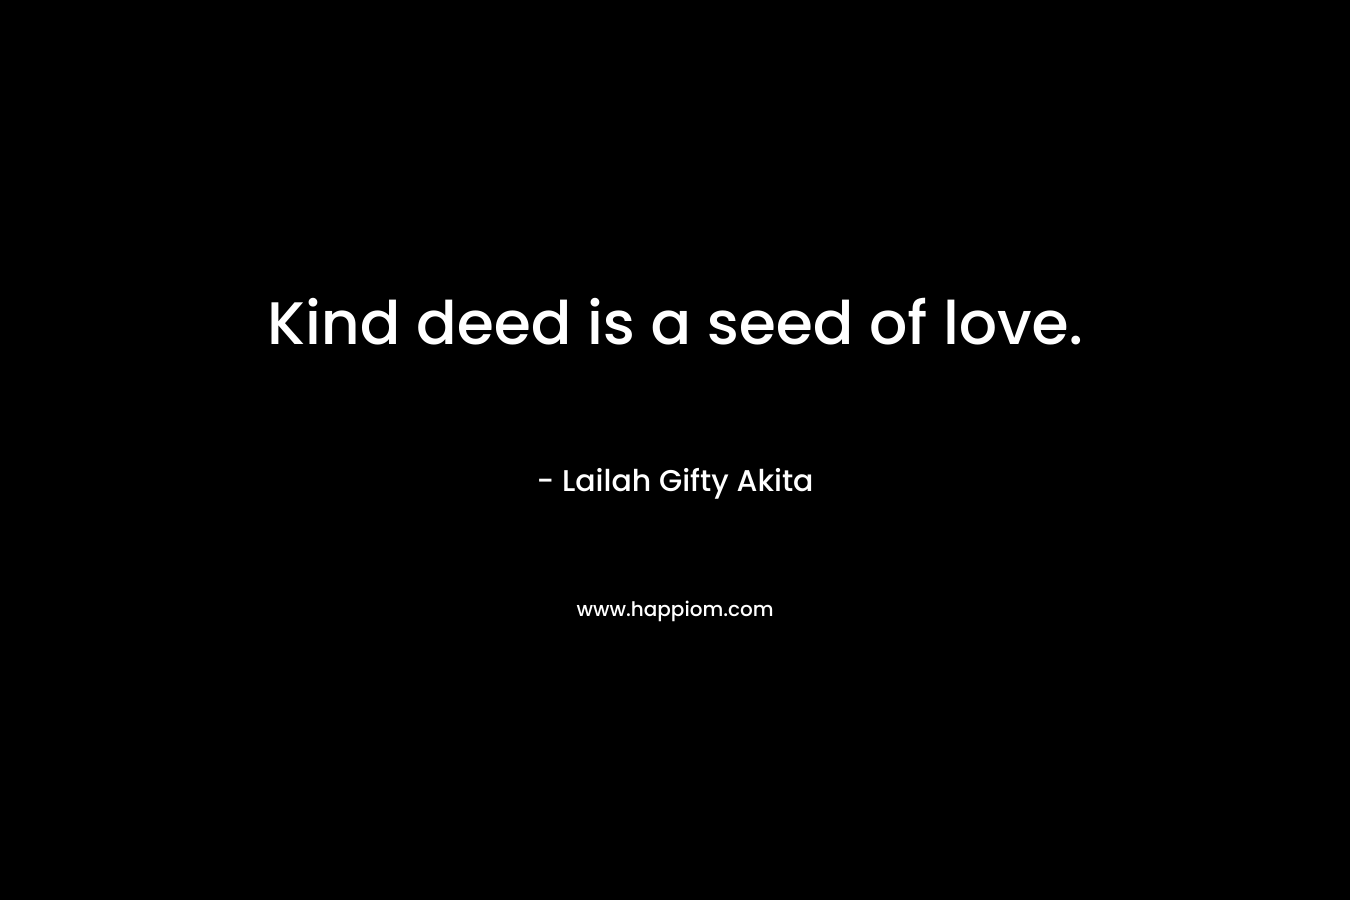 Kind deed is a seed of love.